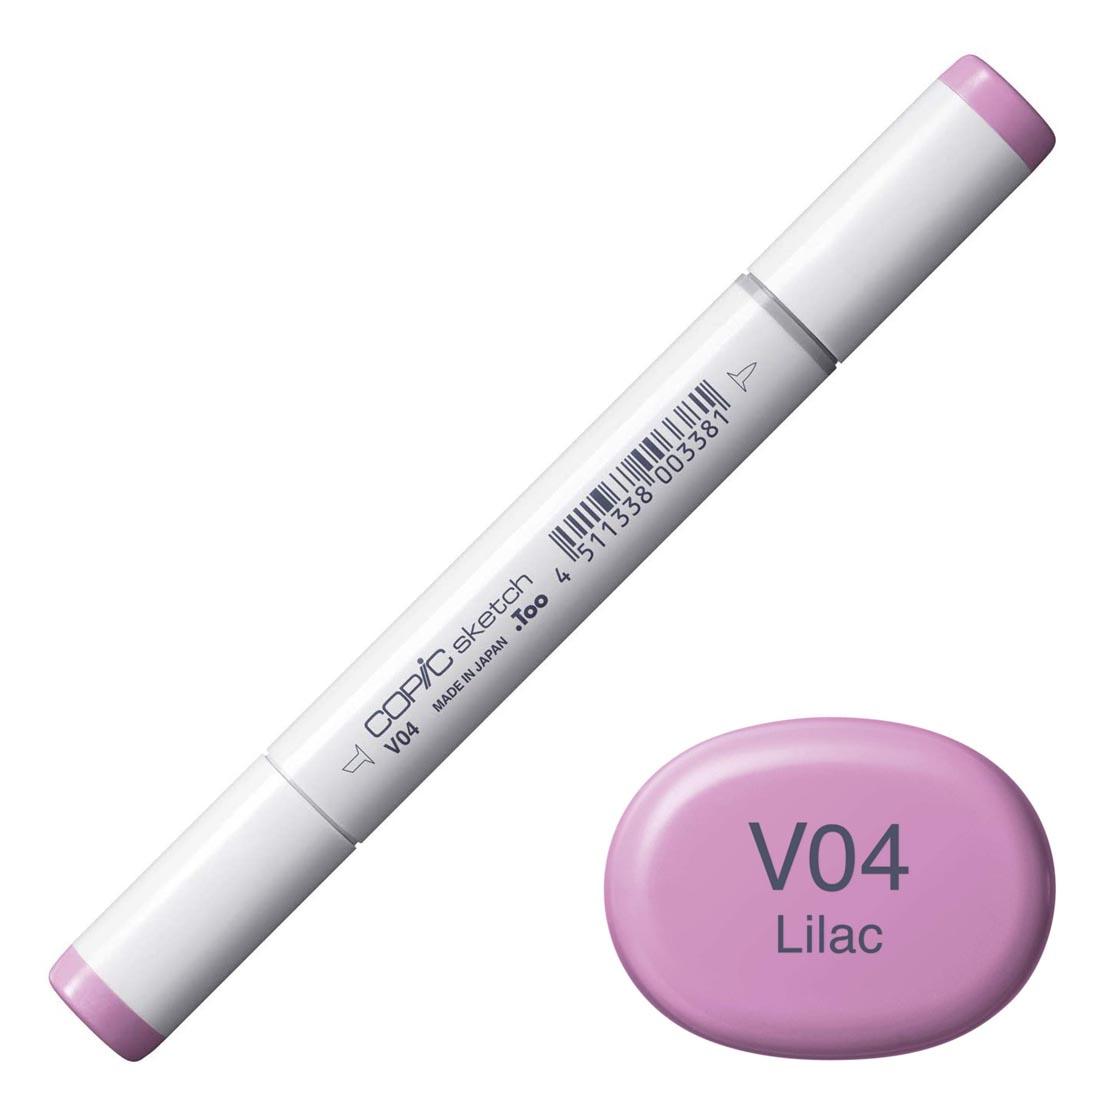 COPIC Sketch Marker with a color swatch and text of V04 Lilac